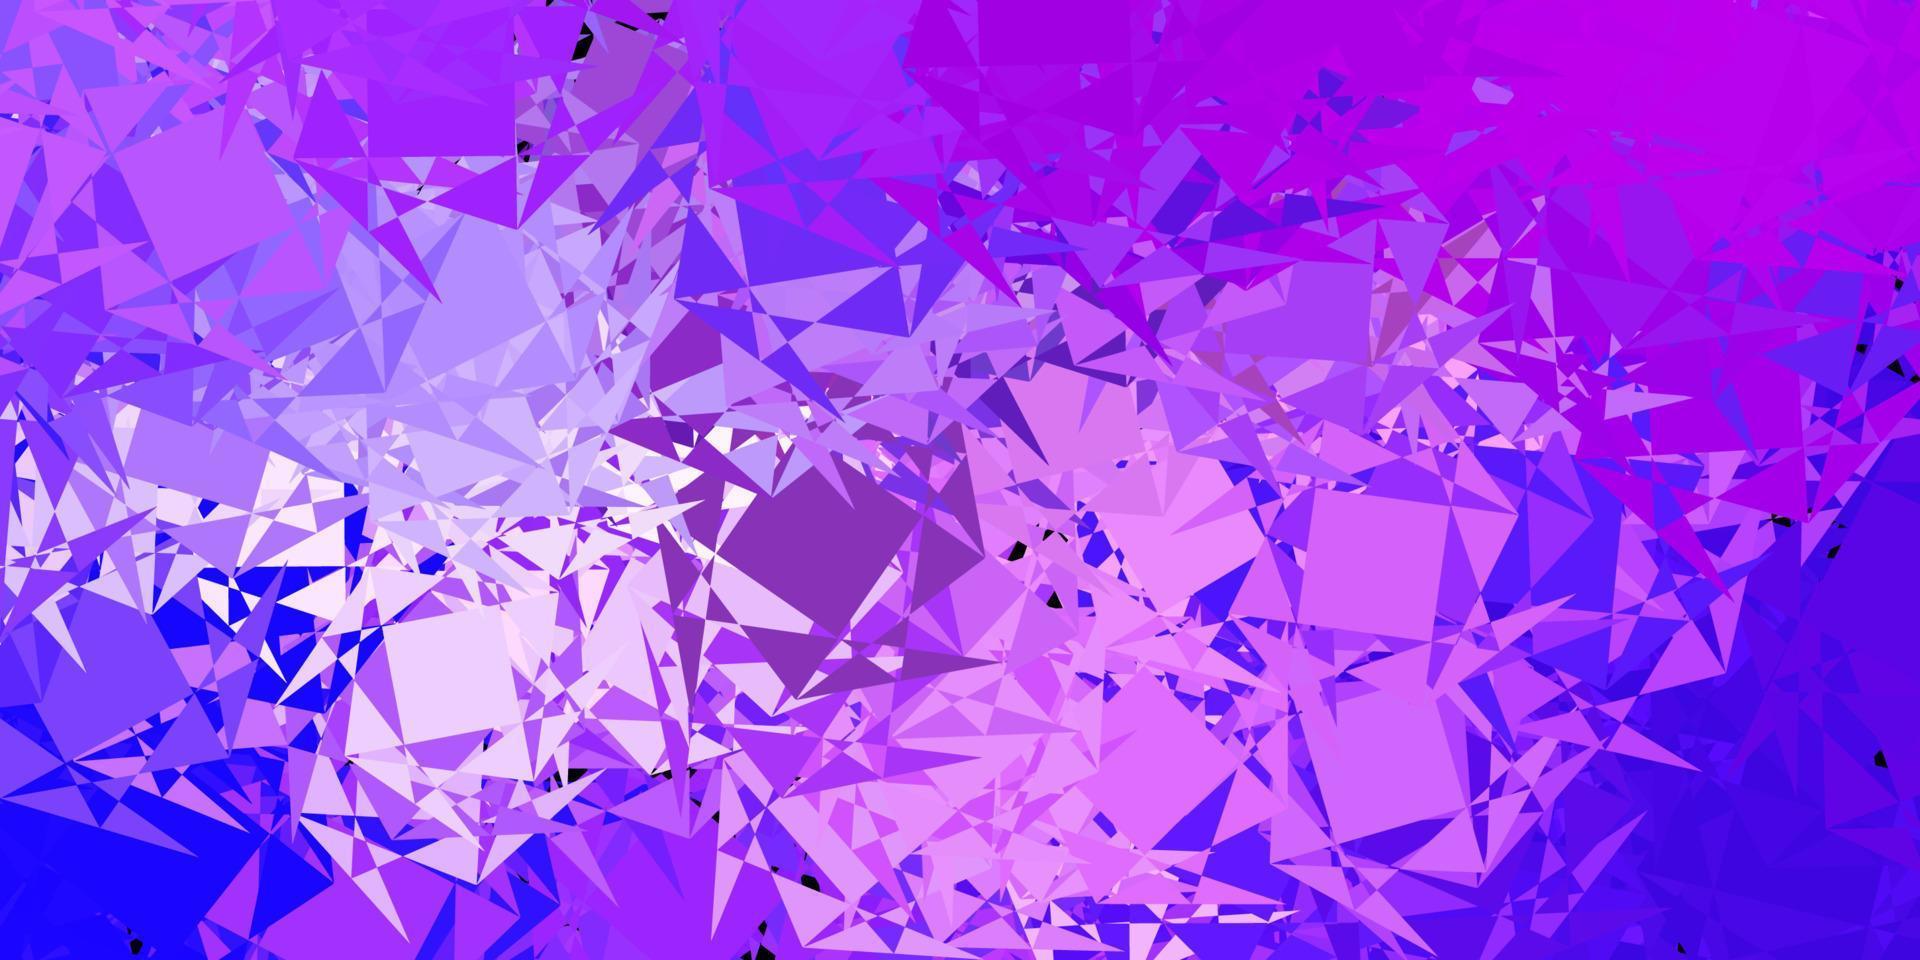 Dark Purple vector pattern with polygonal shapes.